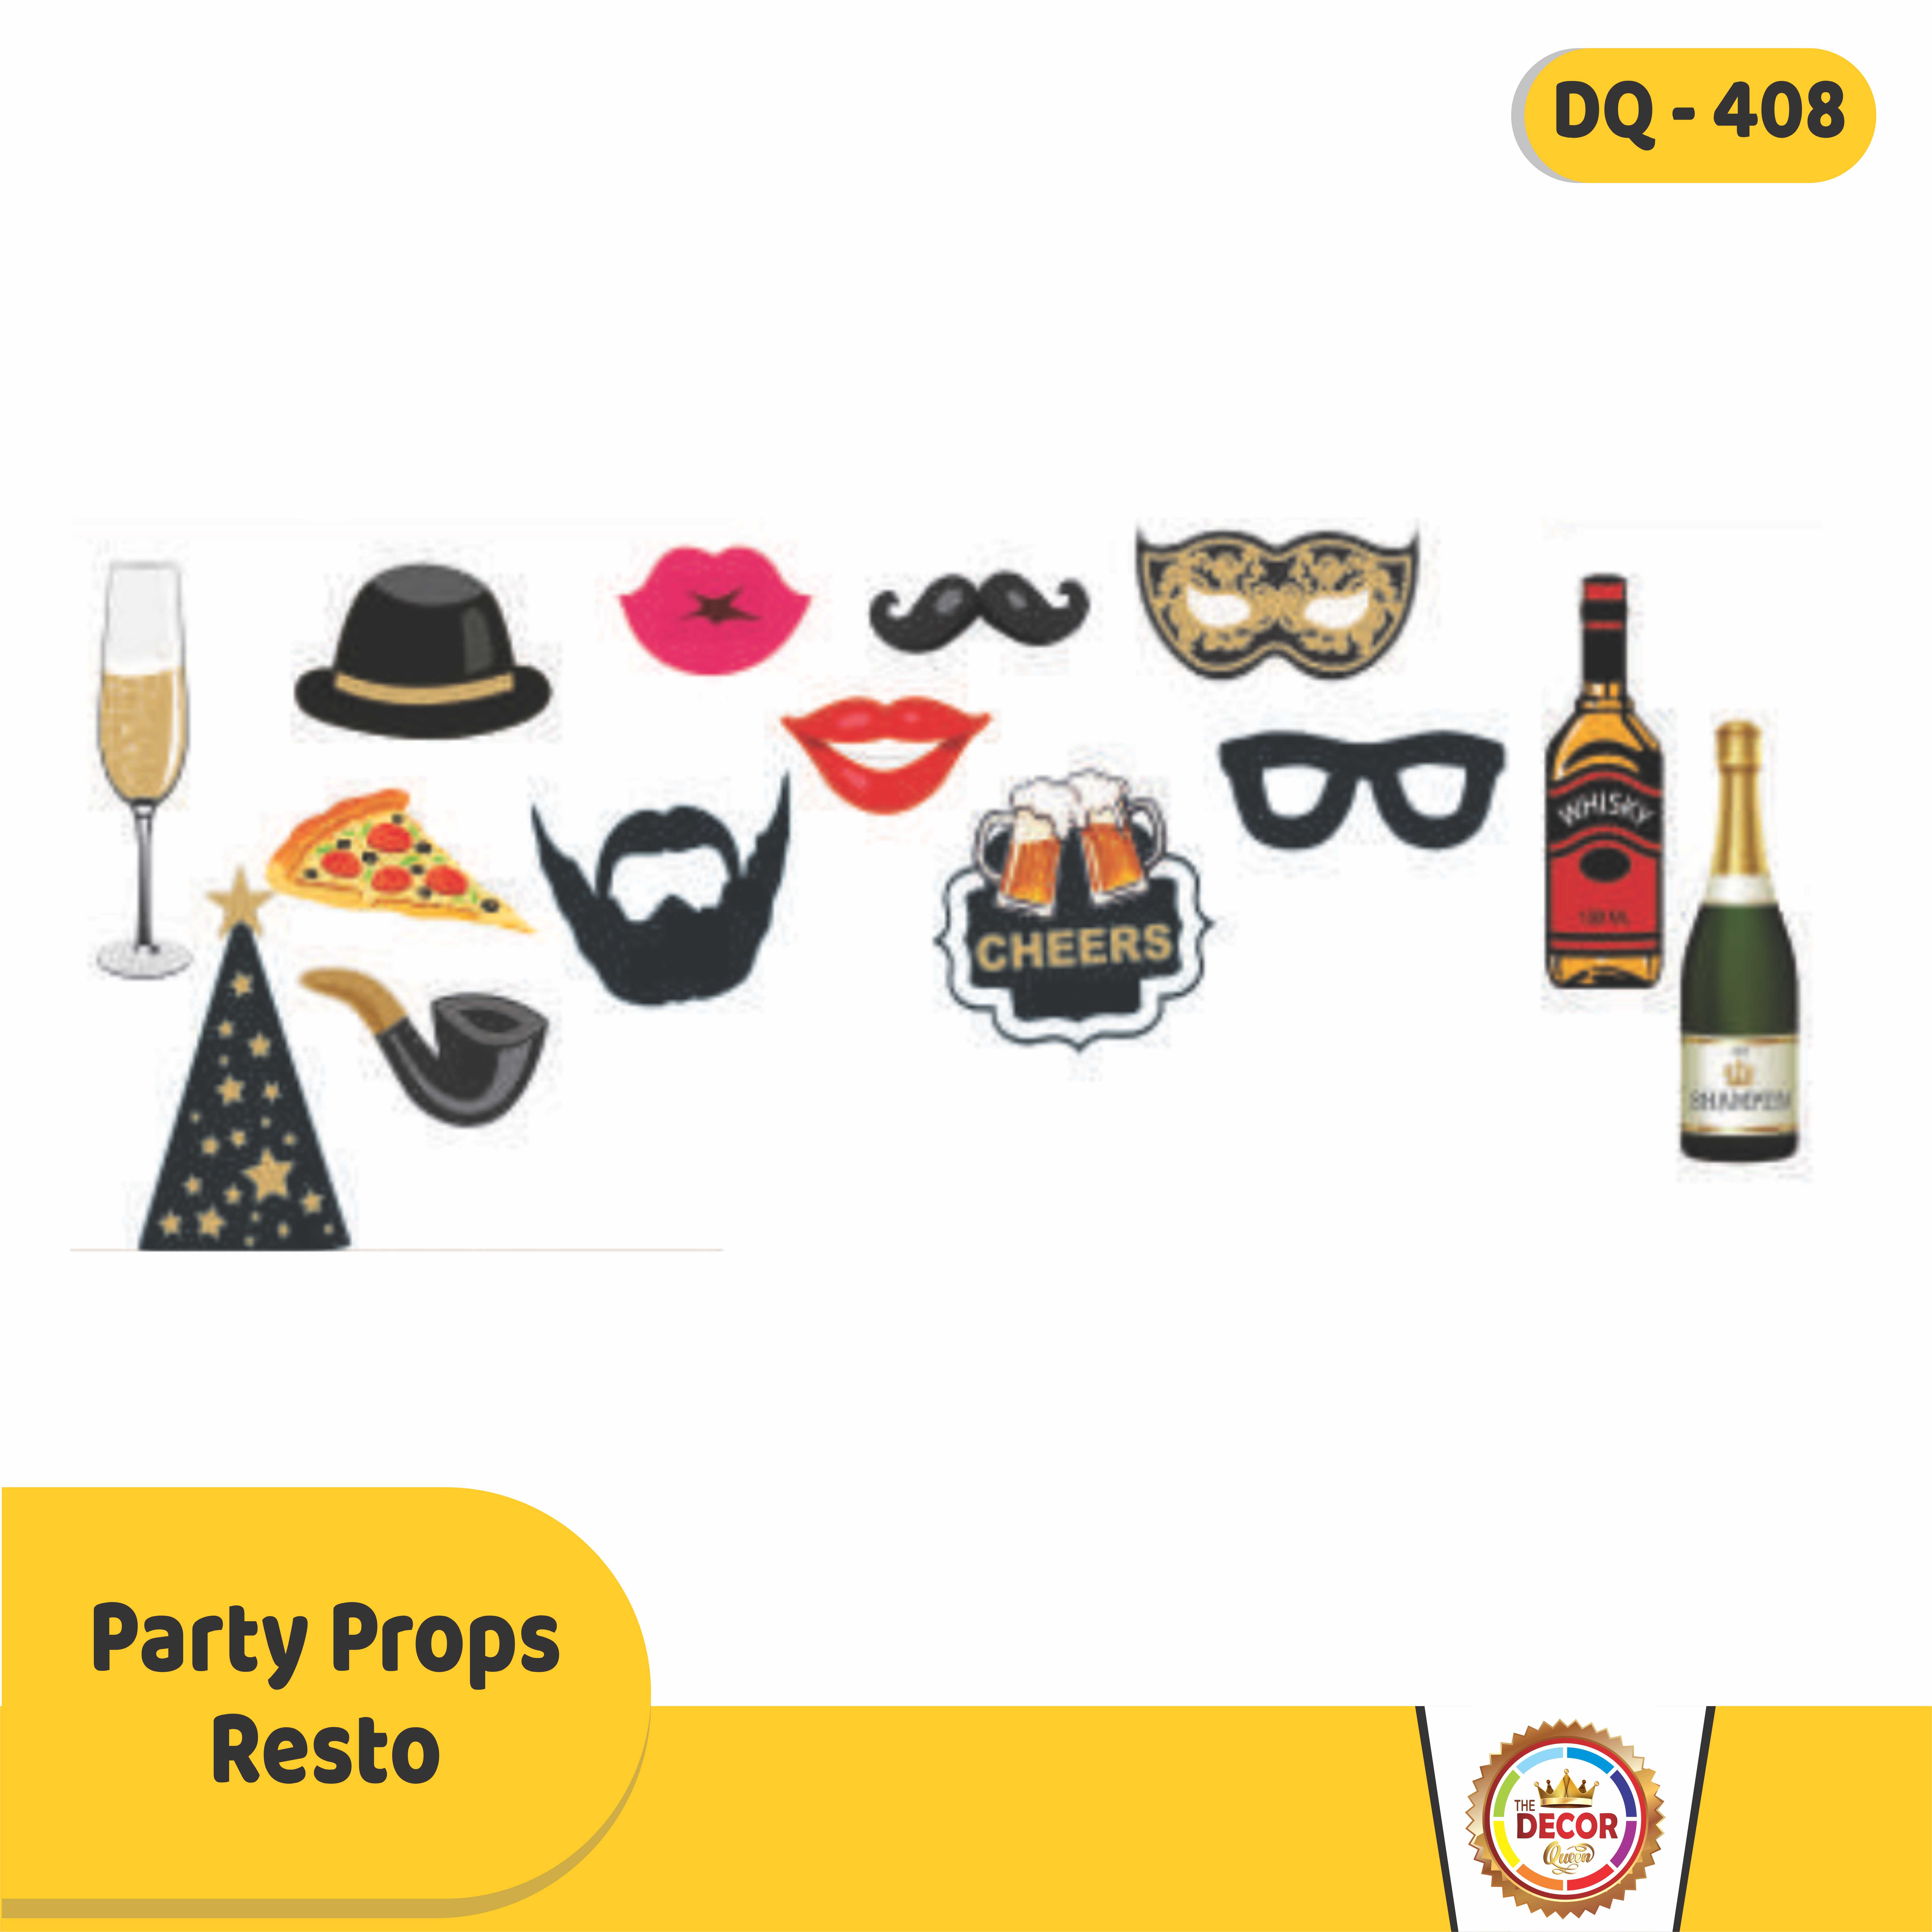 PARTY PROPS RESTO|Party Products|Party Props